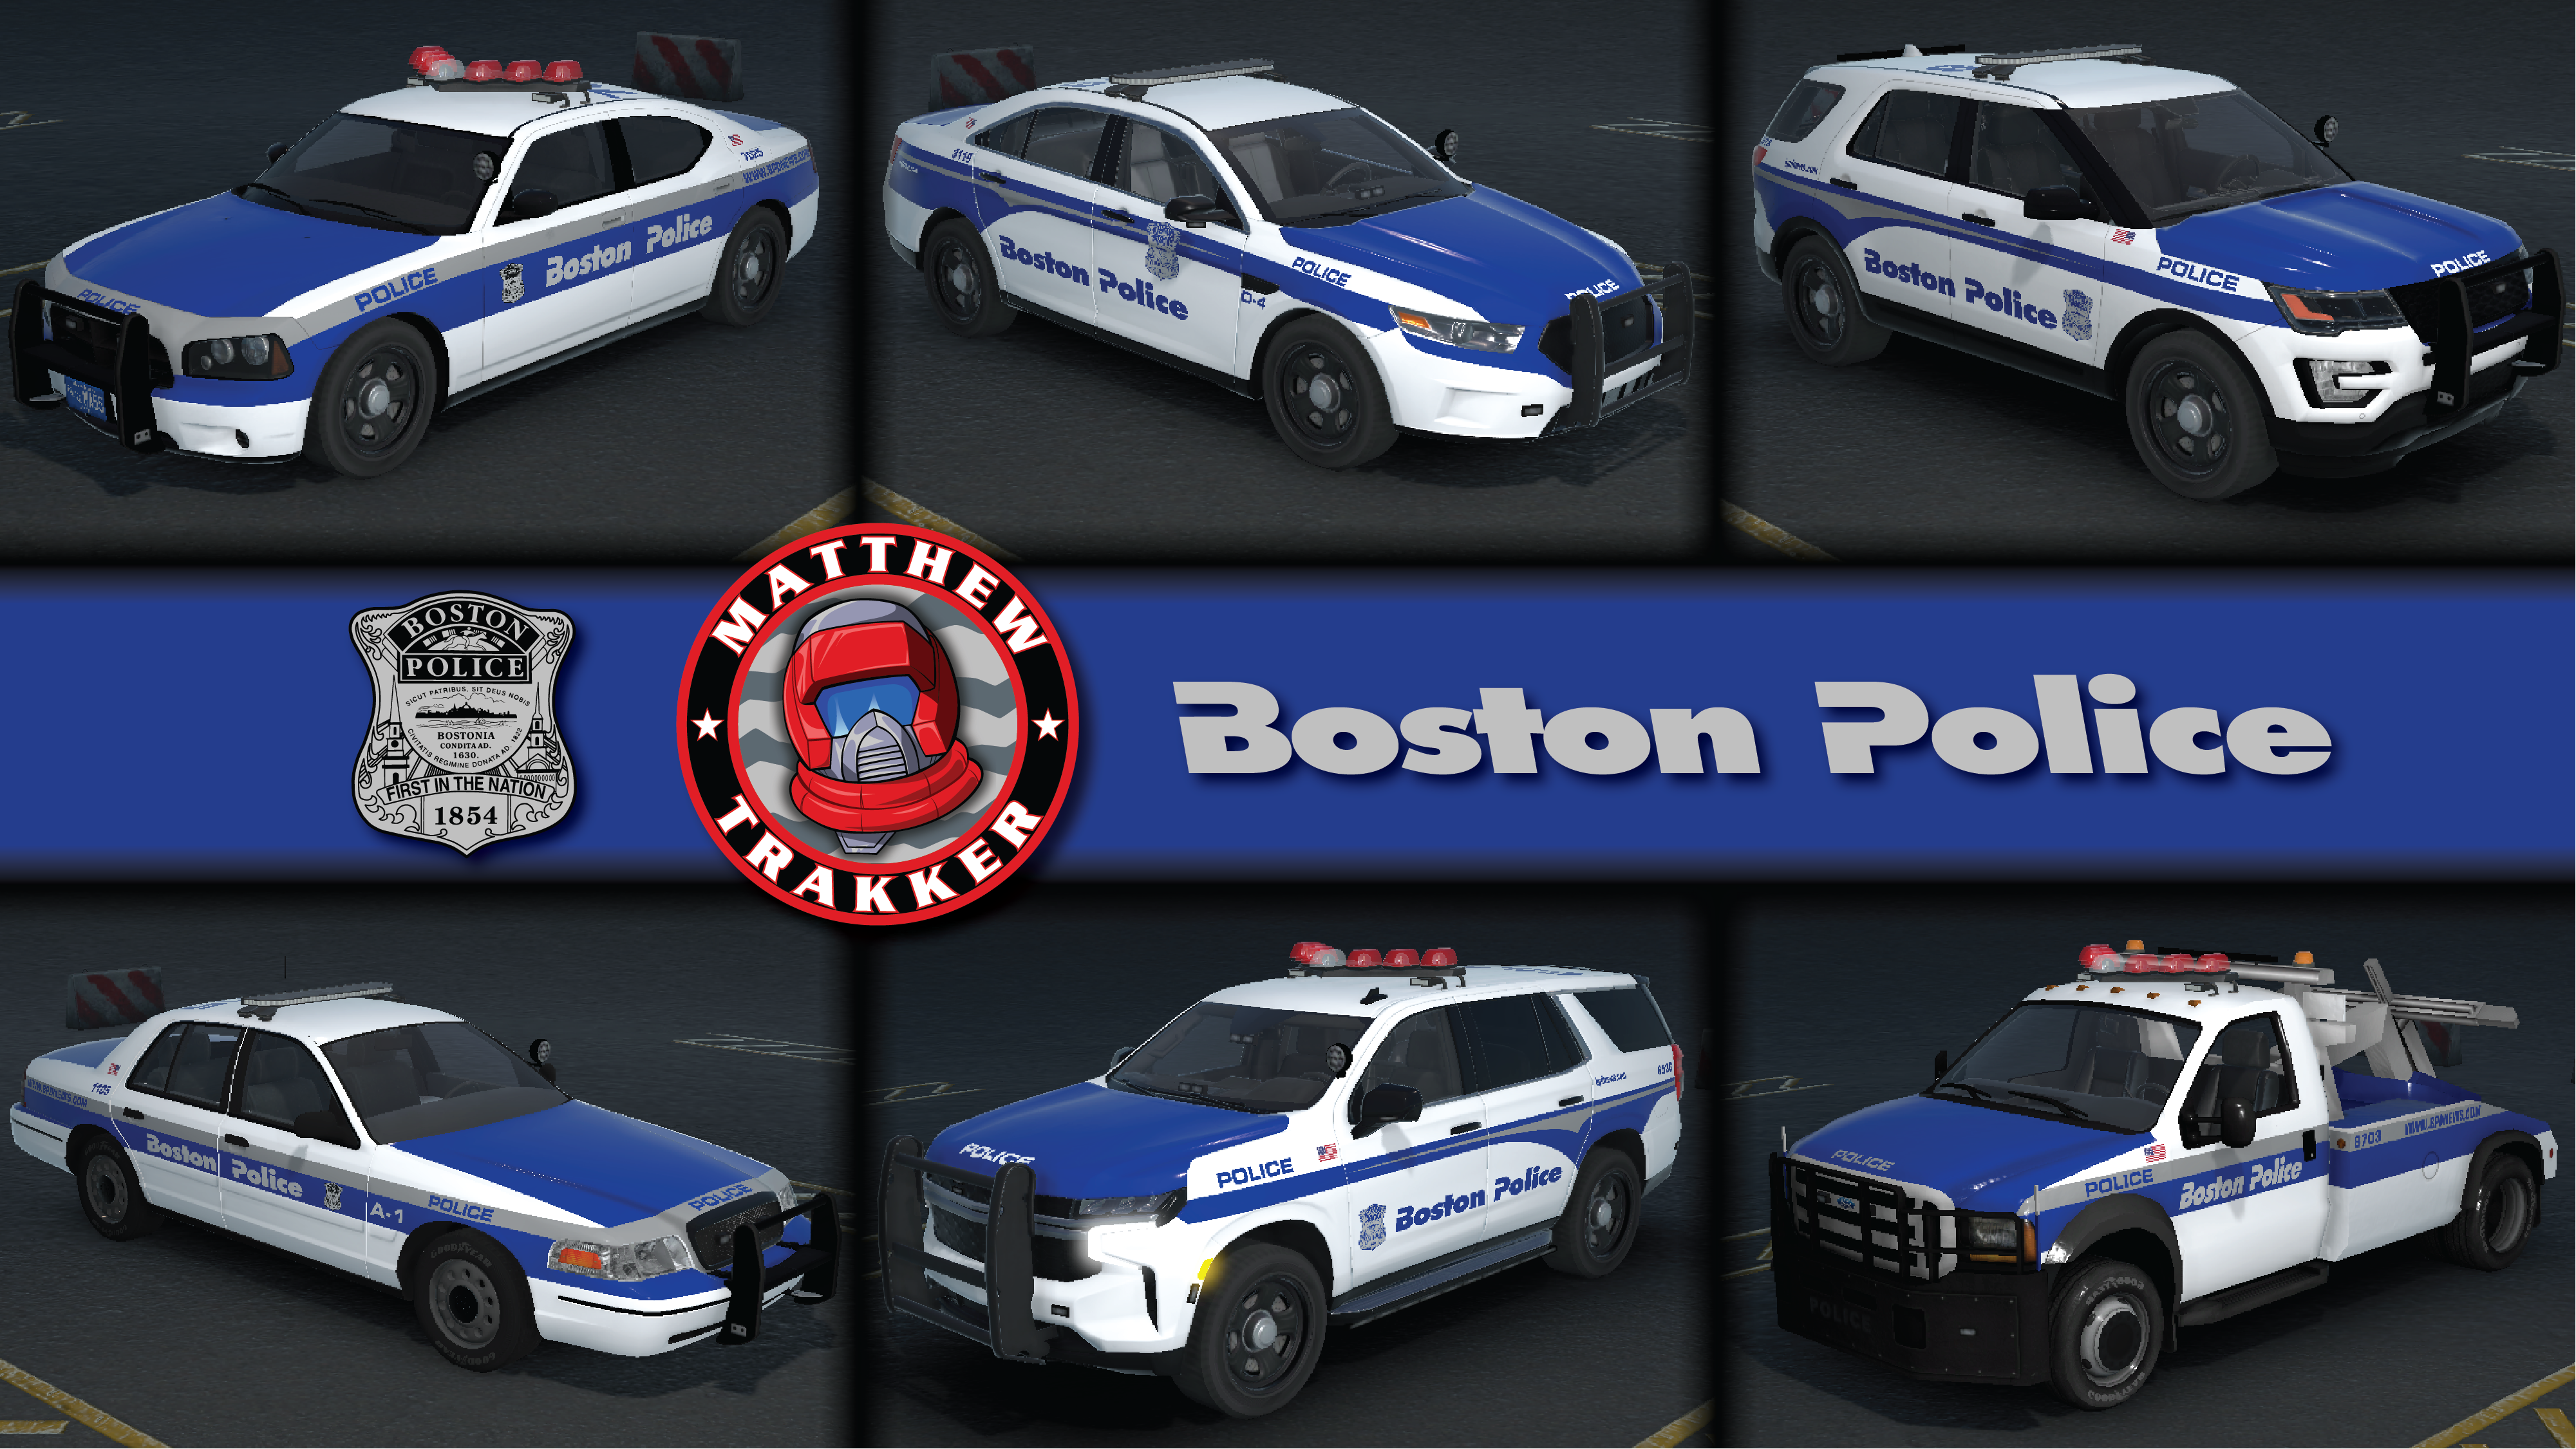 More information about "Boston Police Department Vehicles - Boston, MA"